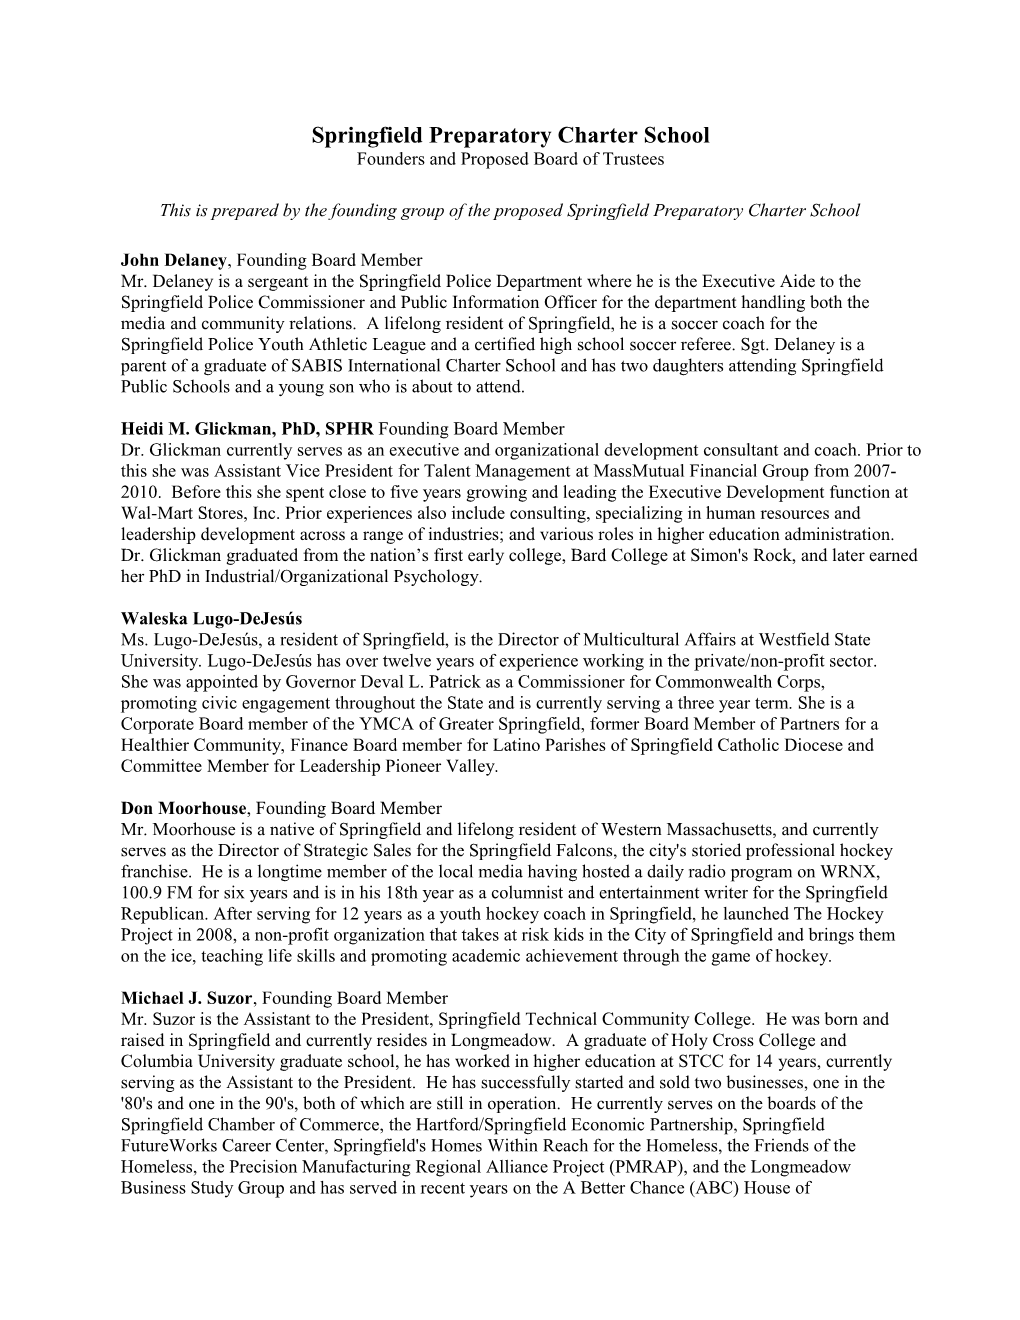 Springfield Preparatory Charter School, Founders and Proposed Board of Trustees, February 2012